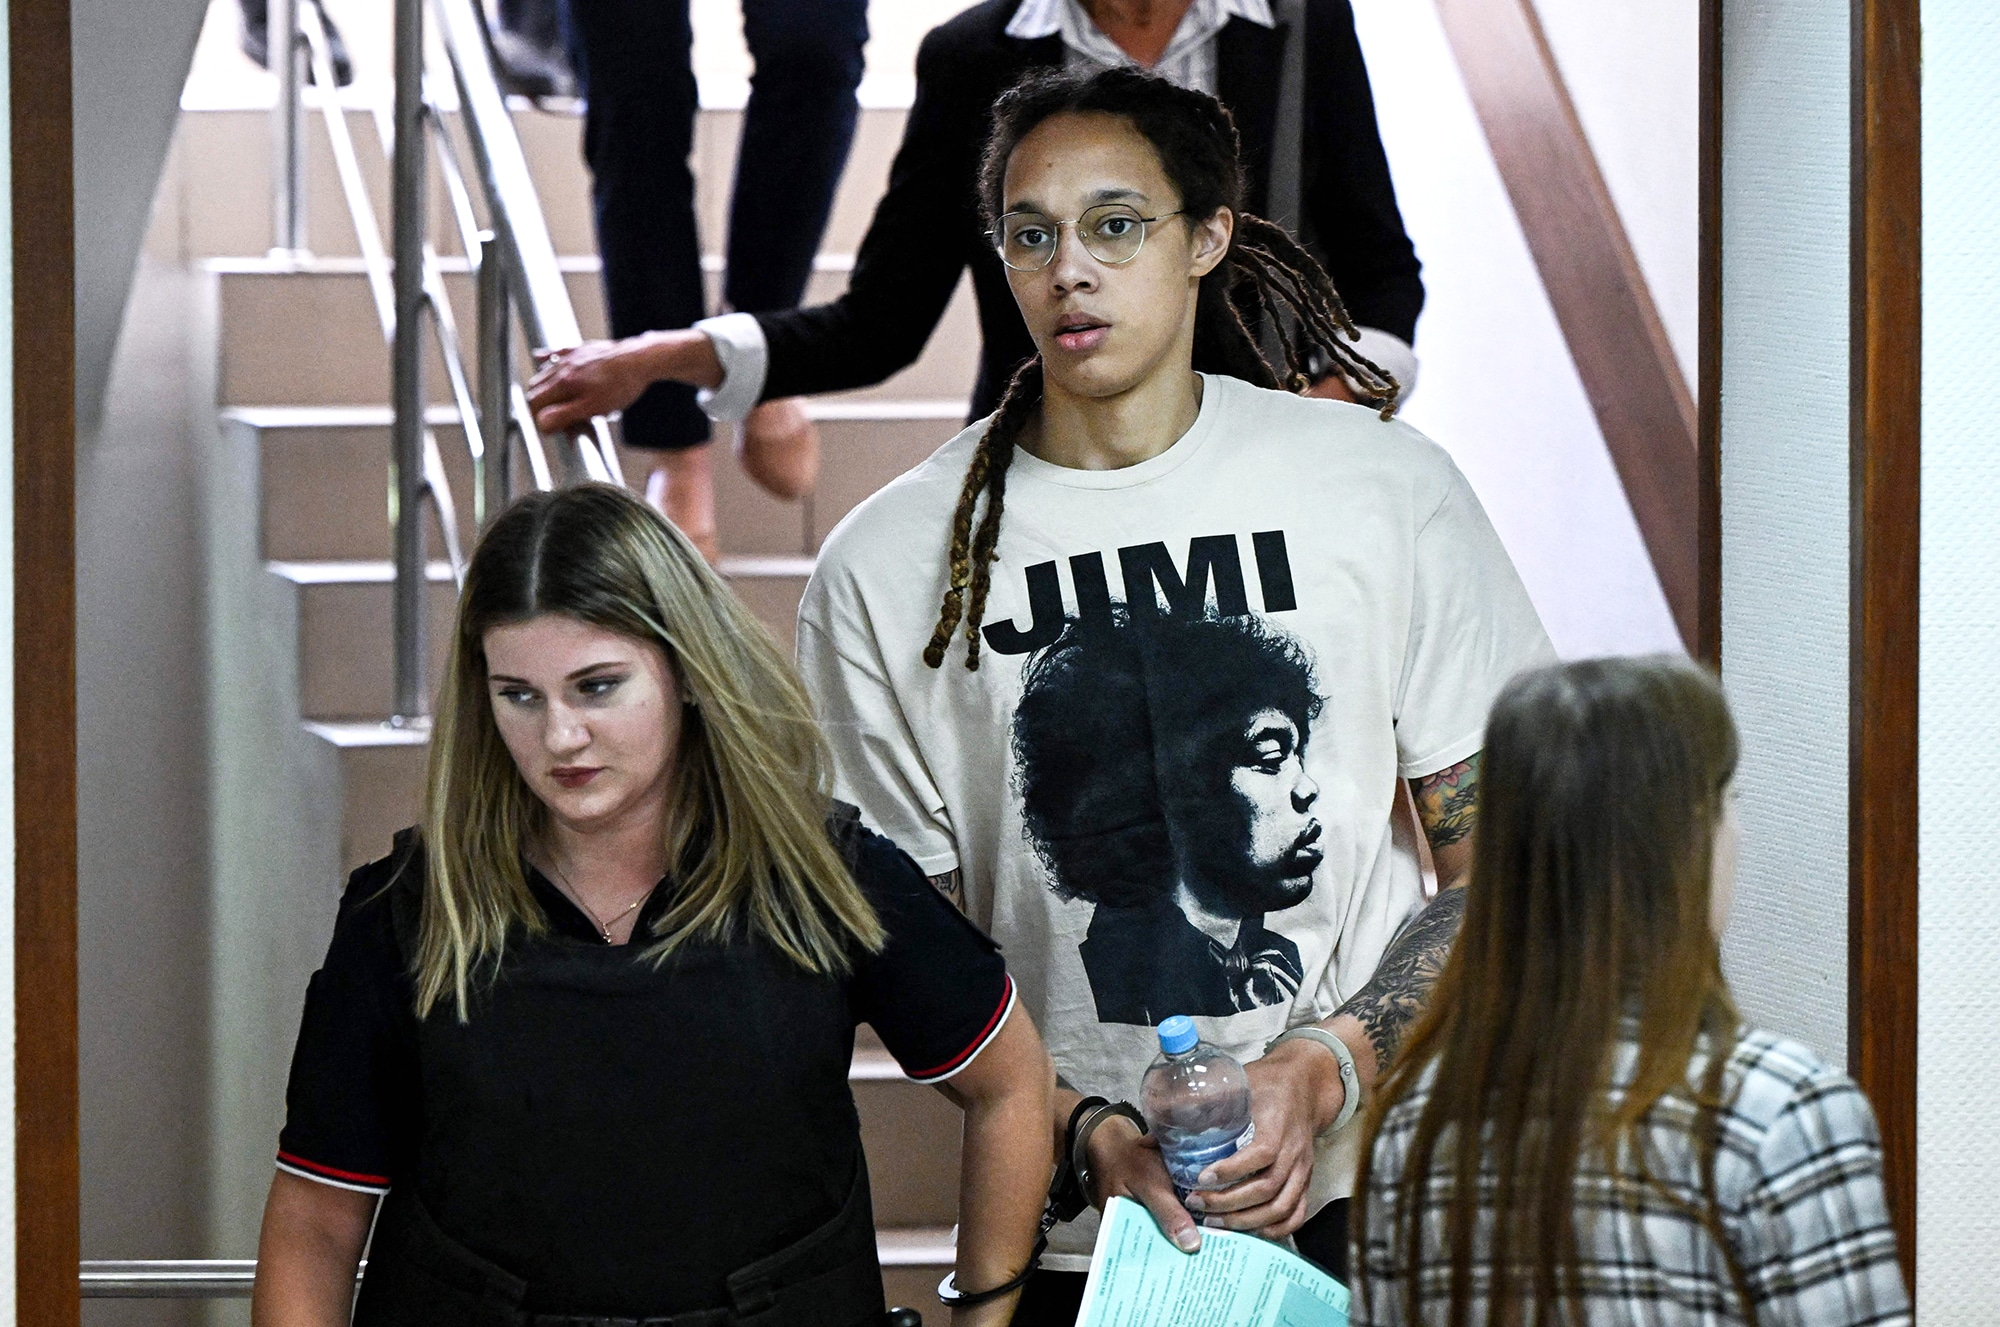 Brittney Griner Goes to Trial in Moscow Court Over Drug Charges